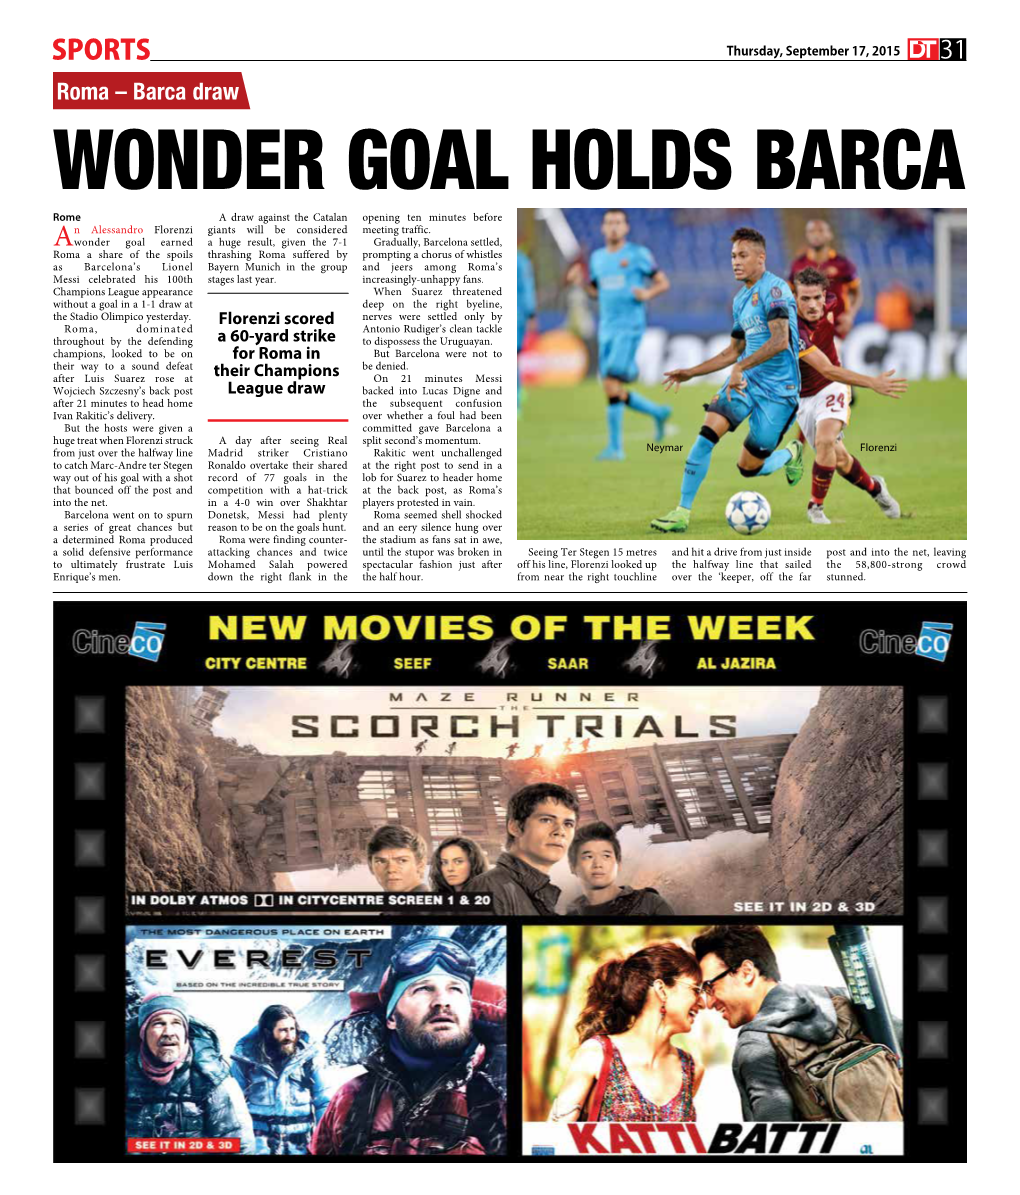 WONDER GOAL HOLDS BARCA the Ramee Grand Hotel in First Five Premier League Matches